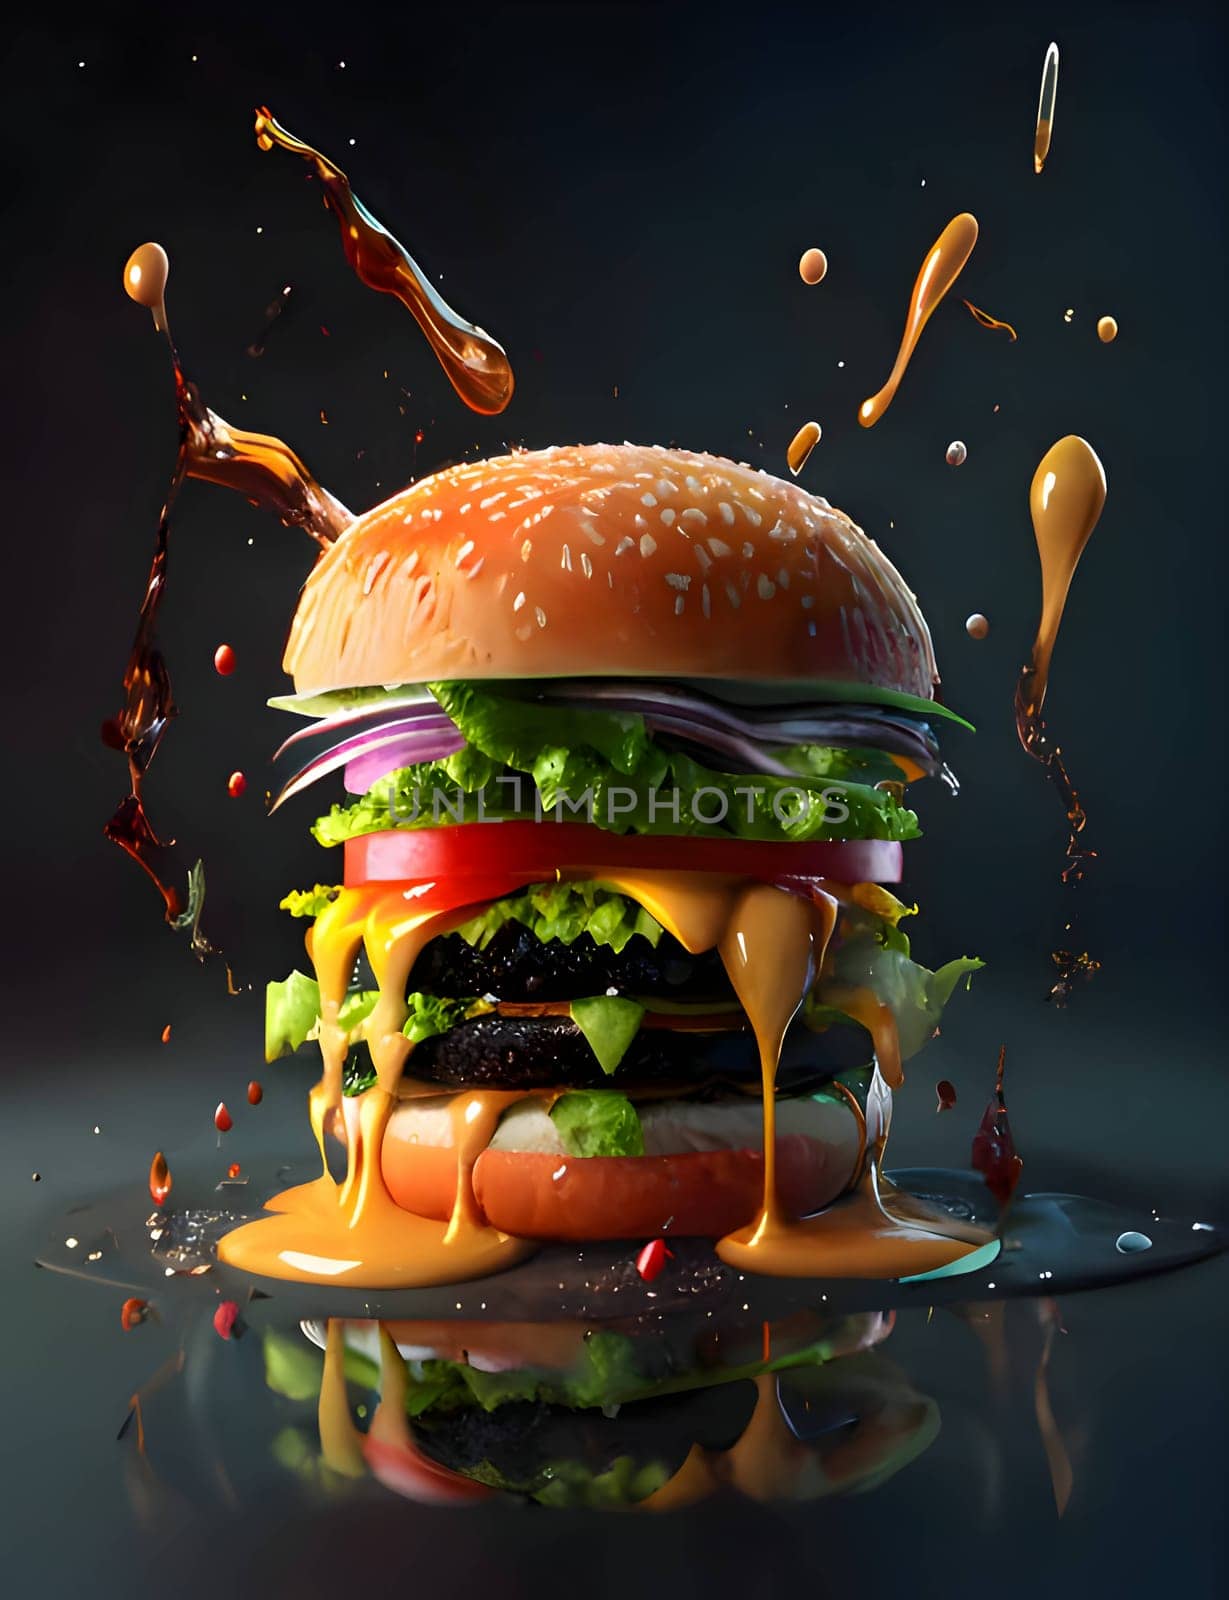 A delicious multi-layered burger with crisp lettuce, melted cheese, juicy tomato, and savory onion, showcased on a dark background.